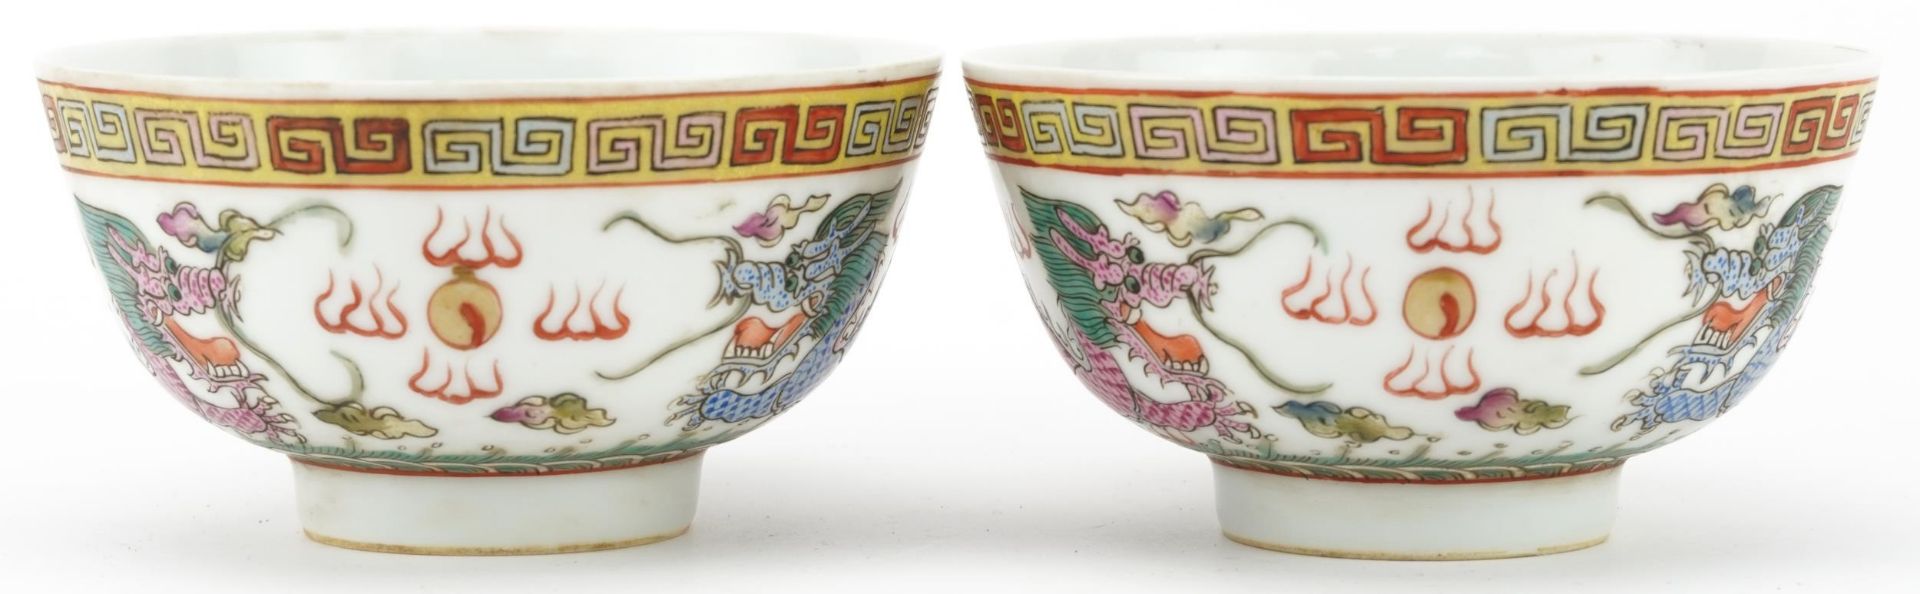 Pair of Chinese porcelain bowls hand painted in the famille rose palette with dragons chasing the